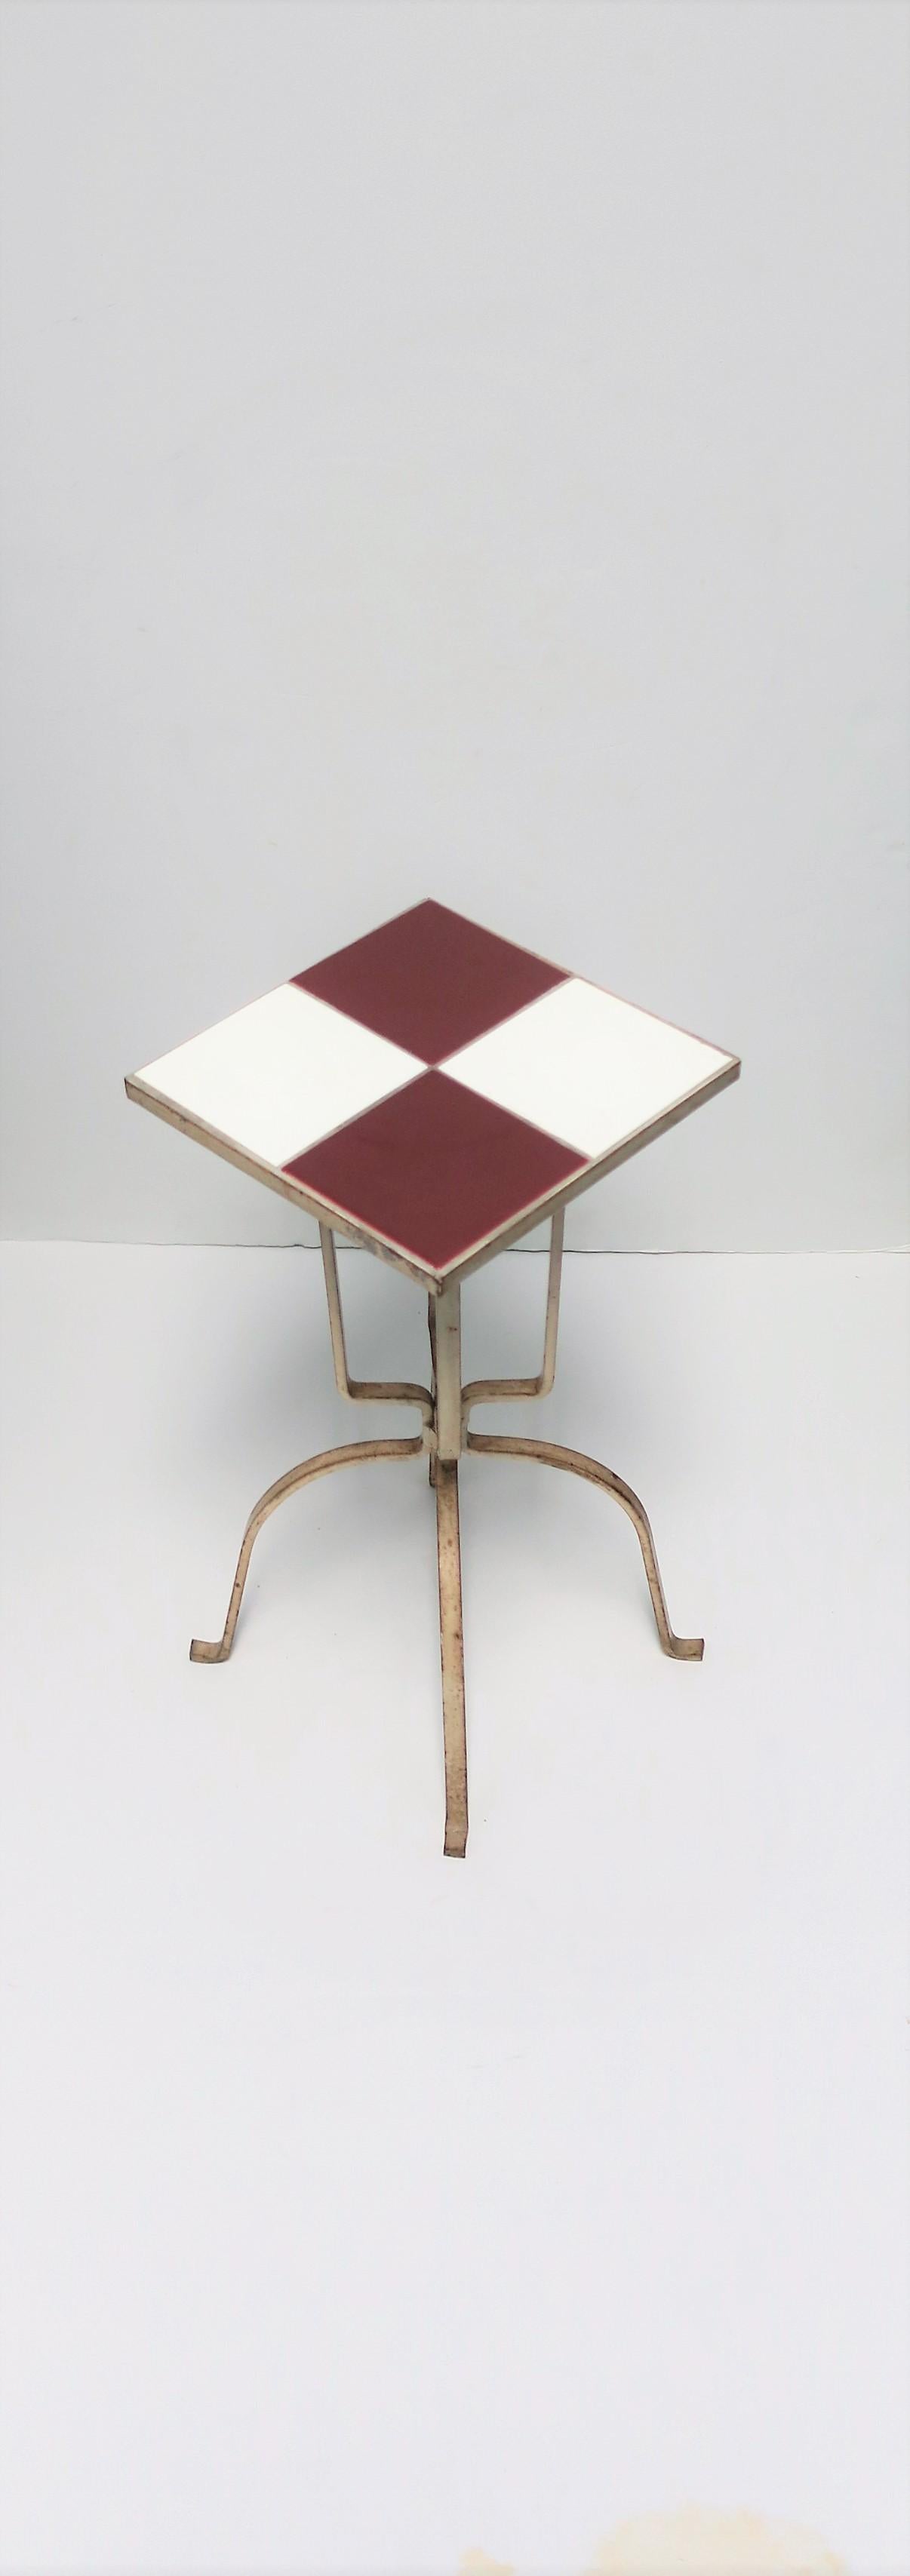 American Mid-Century Modern Red and White Ceramic Mosaic Tile Side or Drinks Table